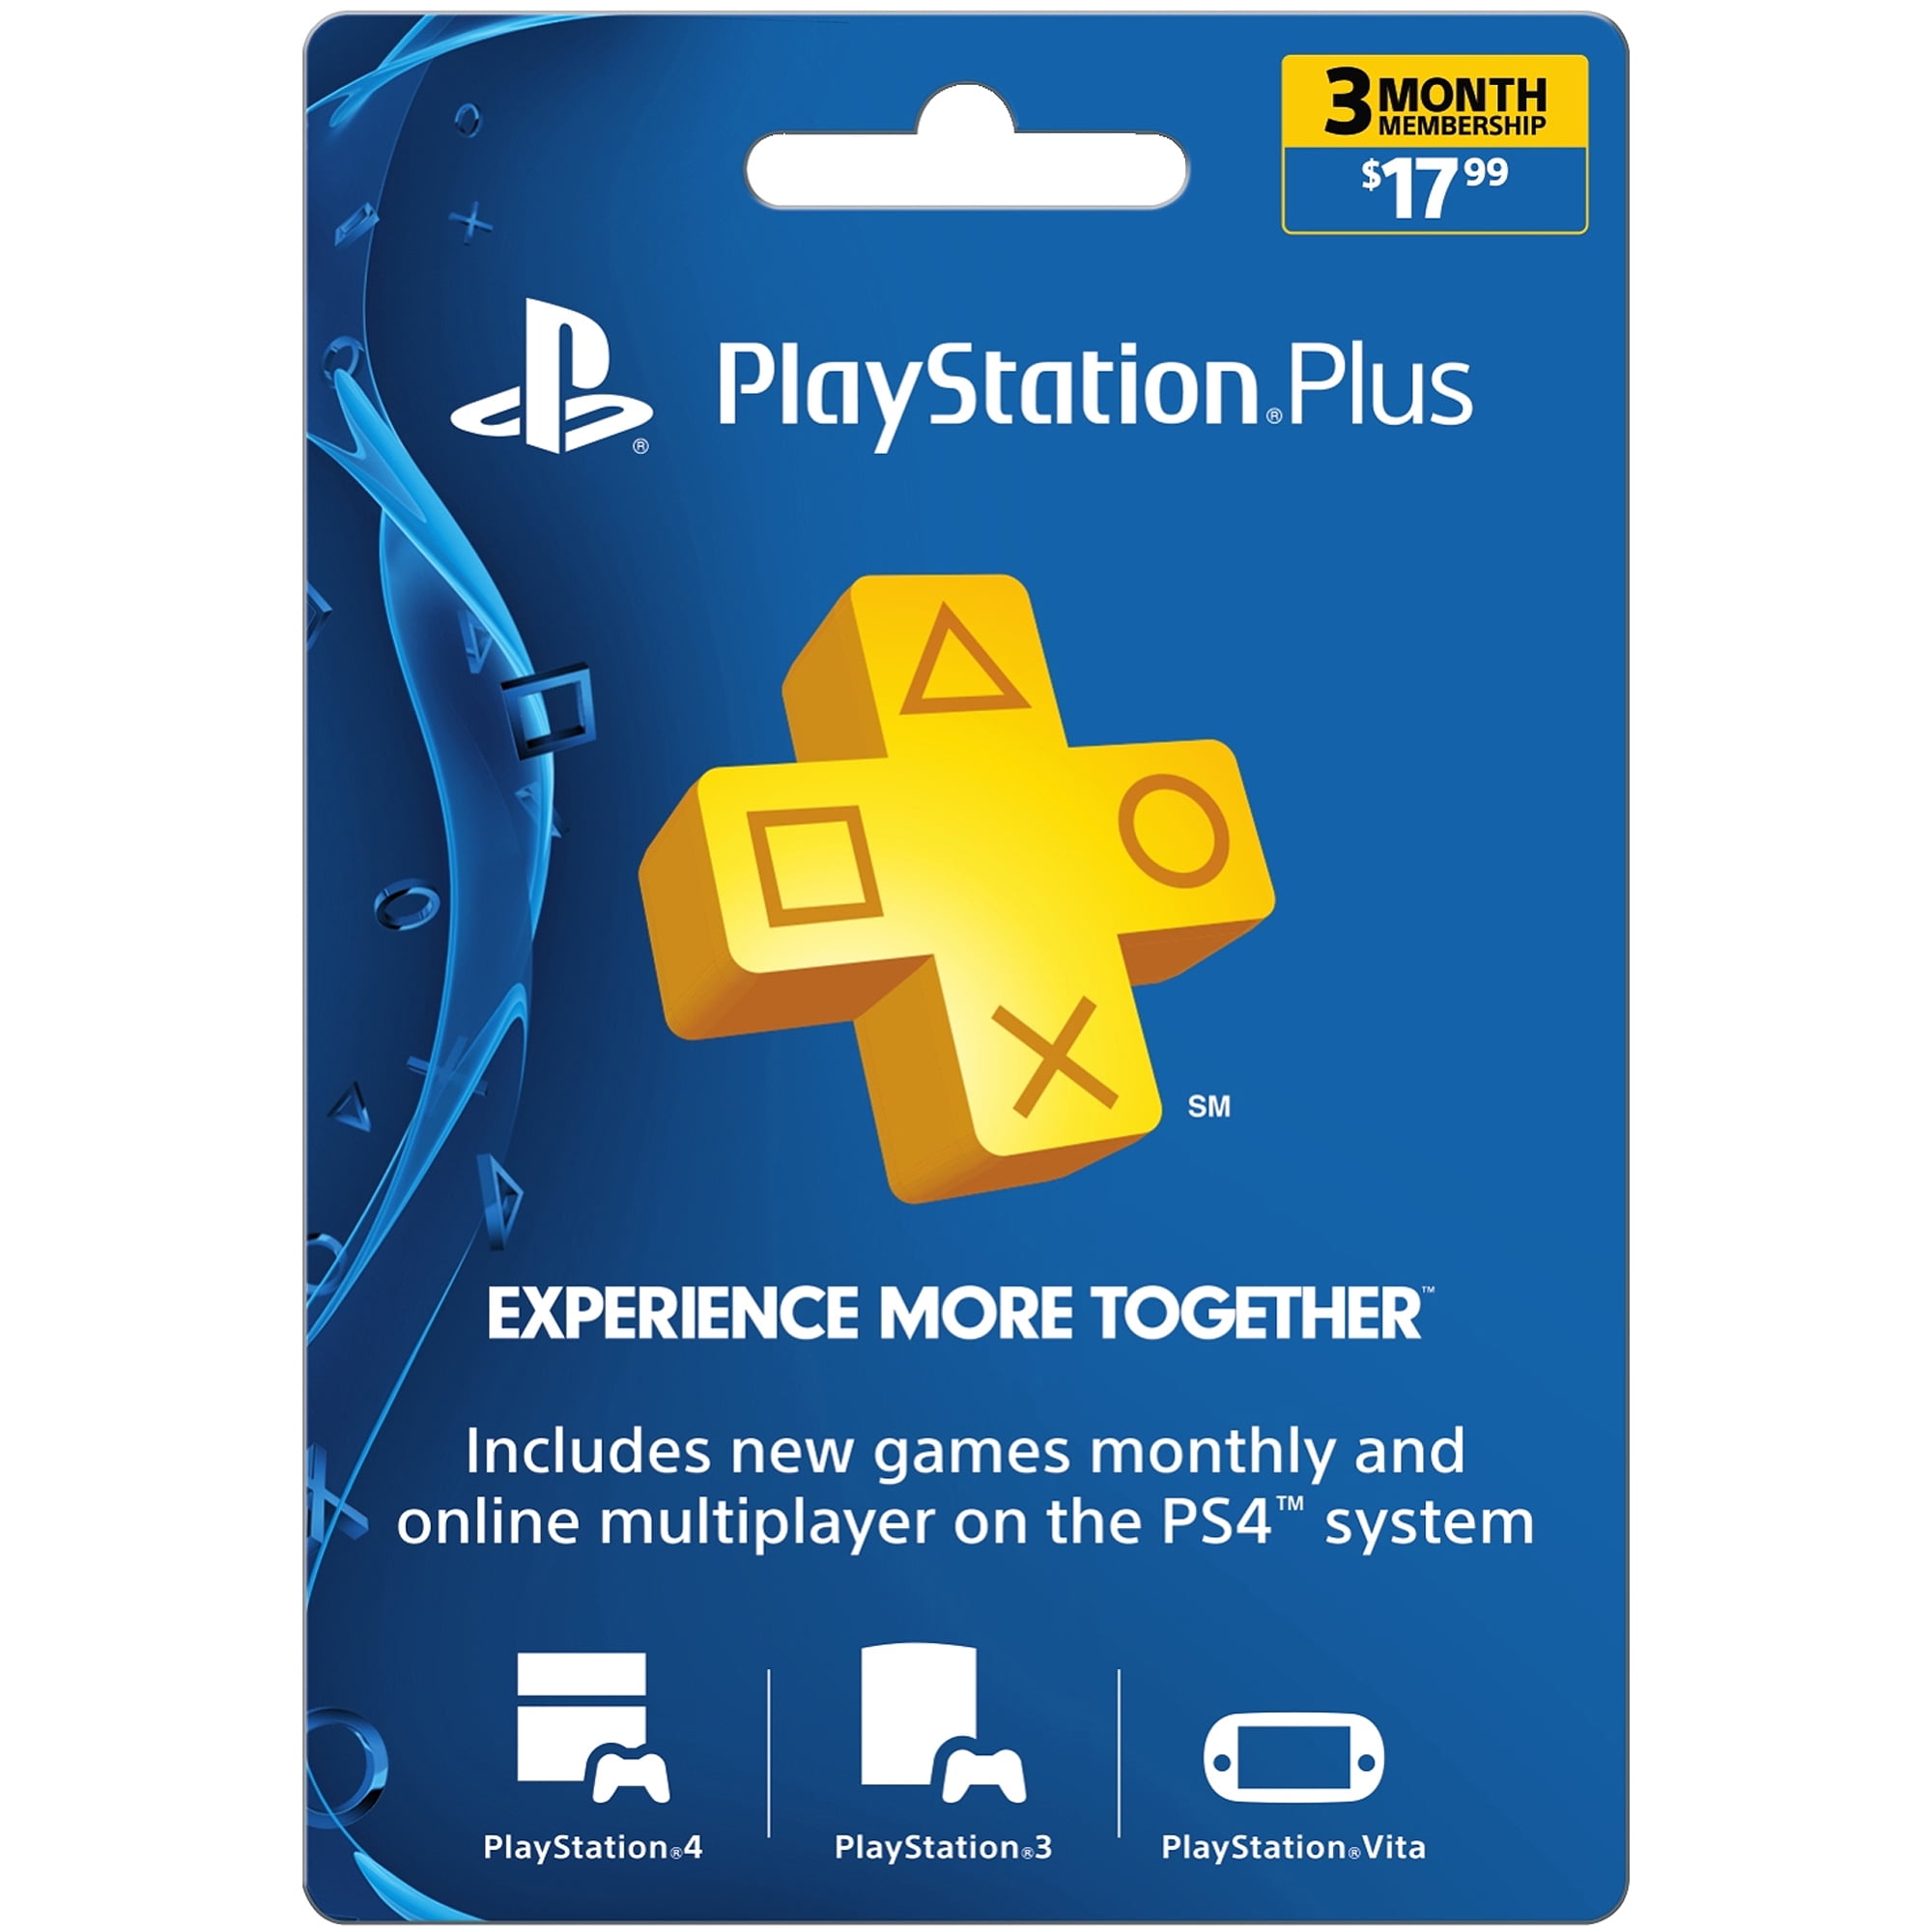 How Much Is Playstation Plus For 3 Months